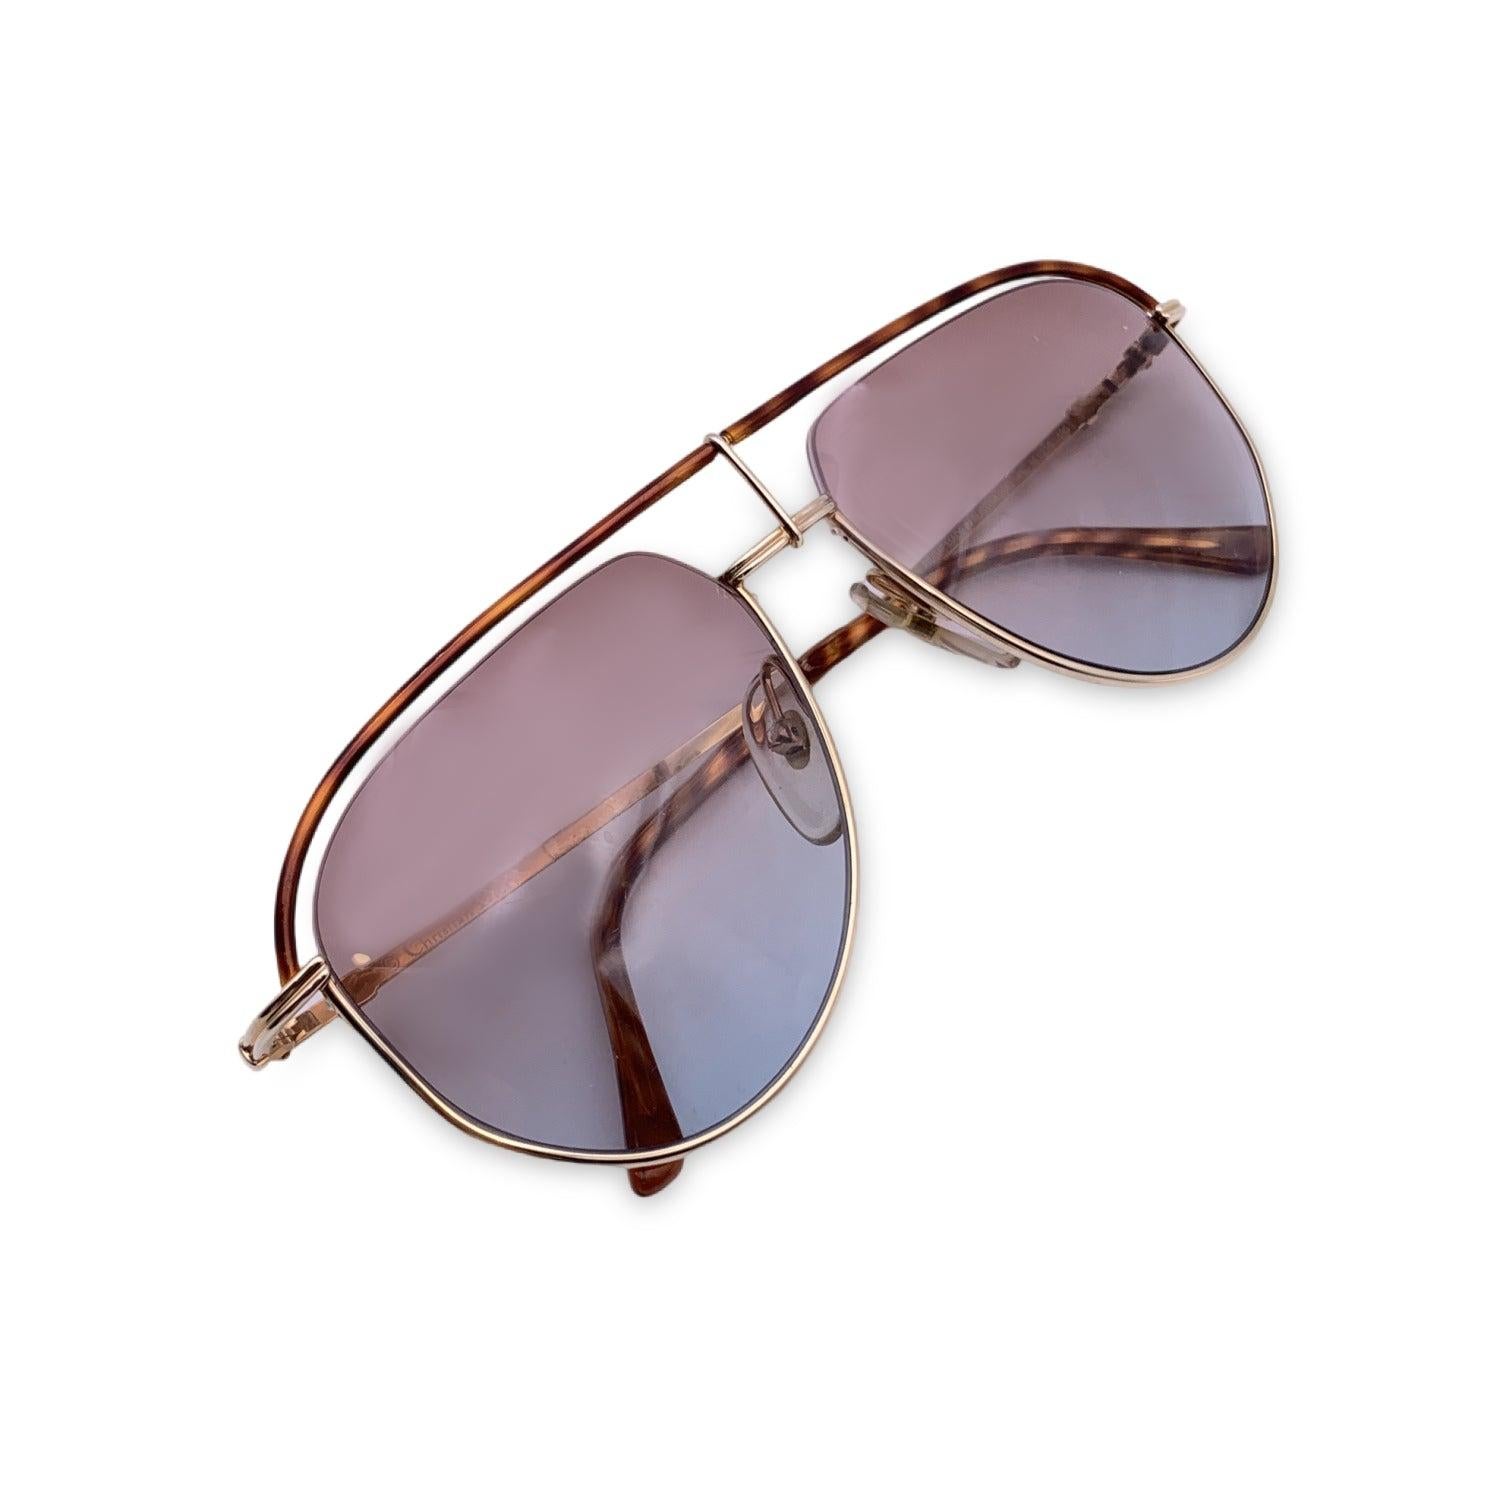 Vintage Christian Dior Unisex Aviator Sunglasses, Mod. 2582 41. Size: 56/16 135mm. Gold metal frame with brown acetate on the upper frame. CD logo on gold temples . 100% Total UVA/UVB protection. Brown to blue gradient lenses. Details MATERIAL: